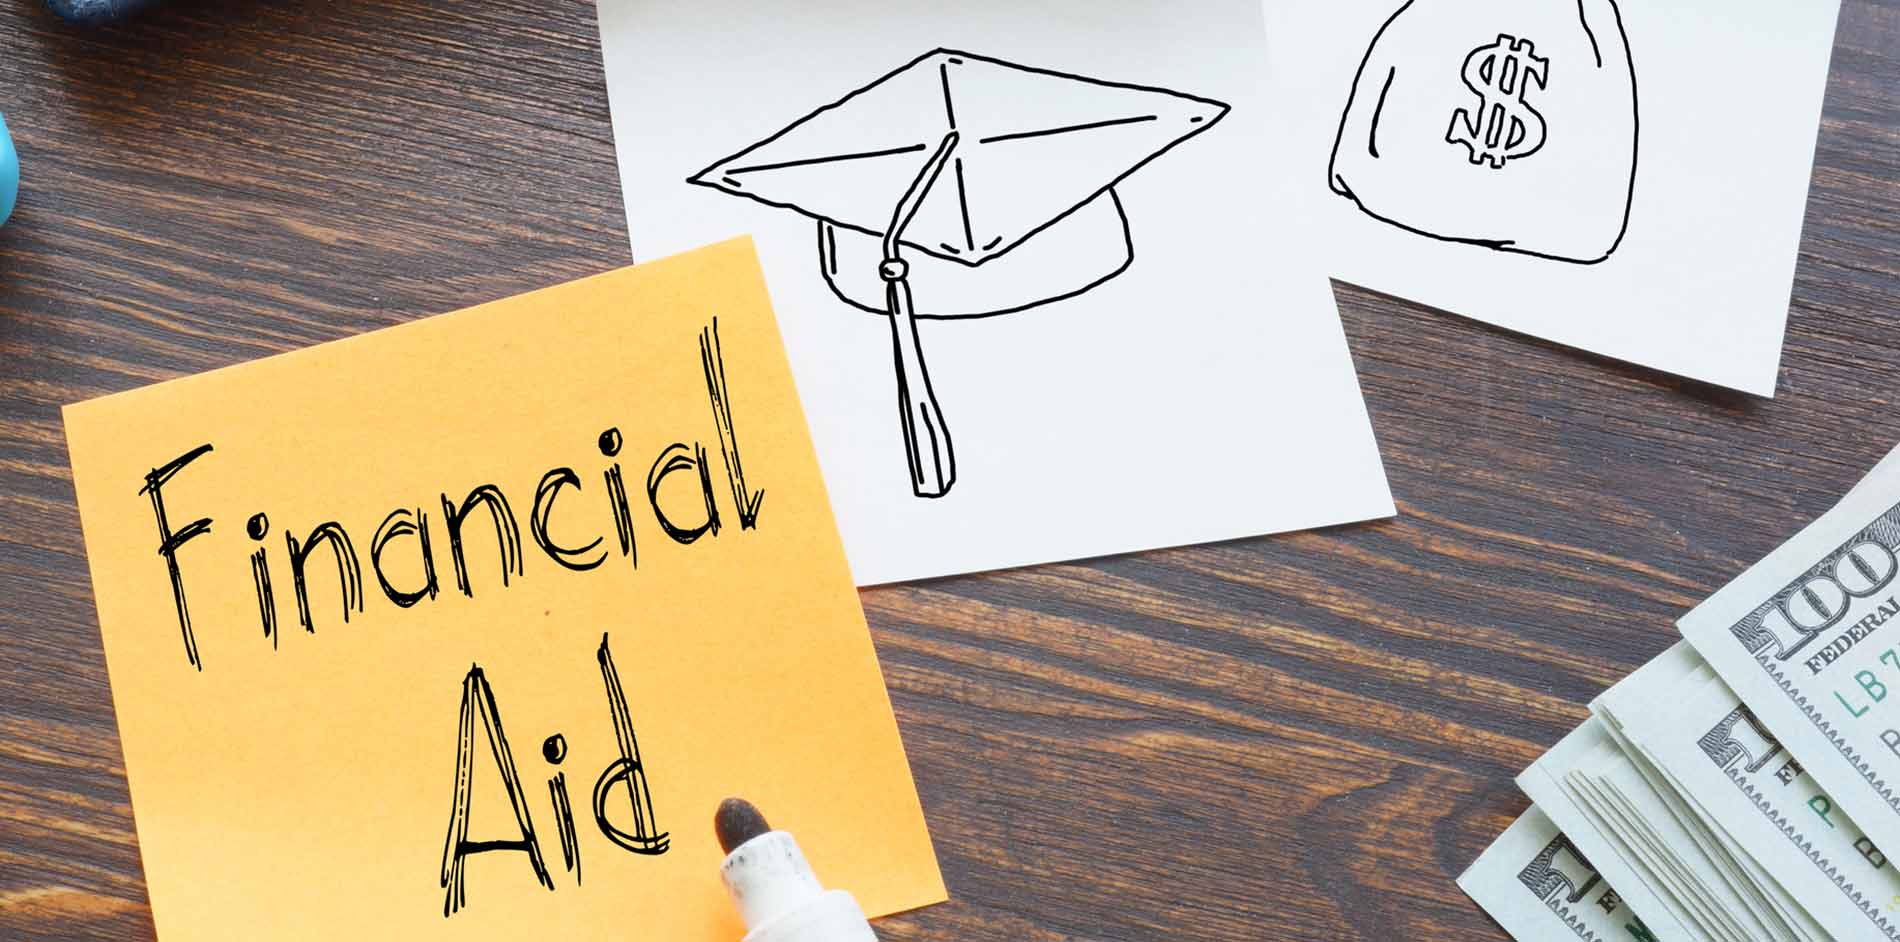 Financial Aid written on post it with two post its with money bag and graduation cap drawing